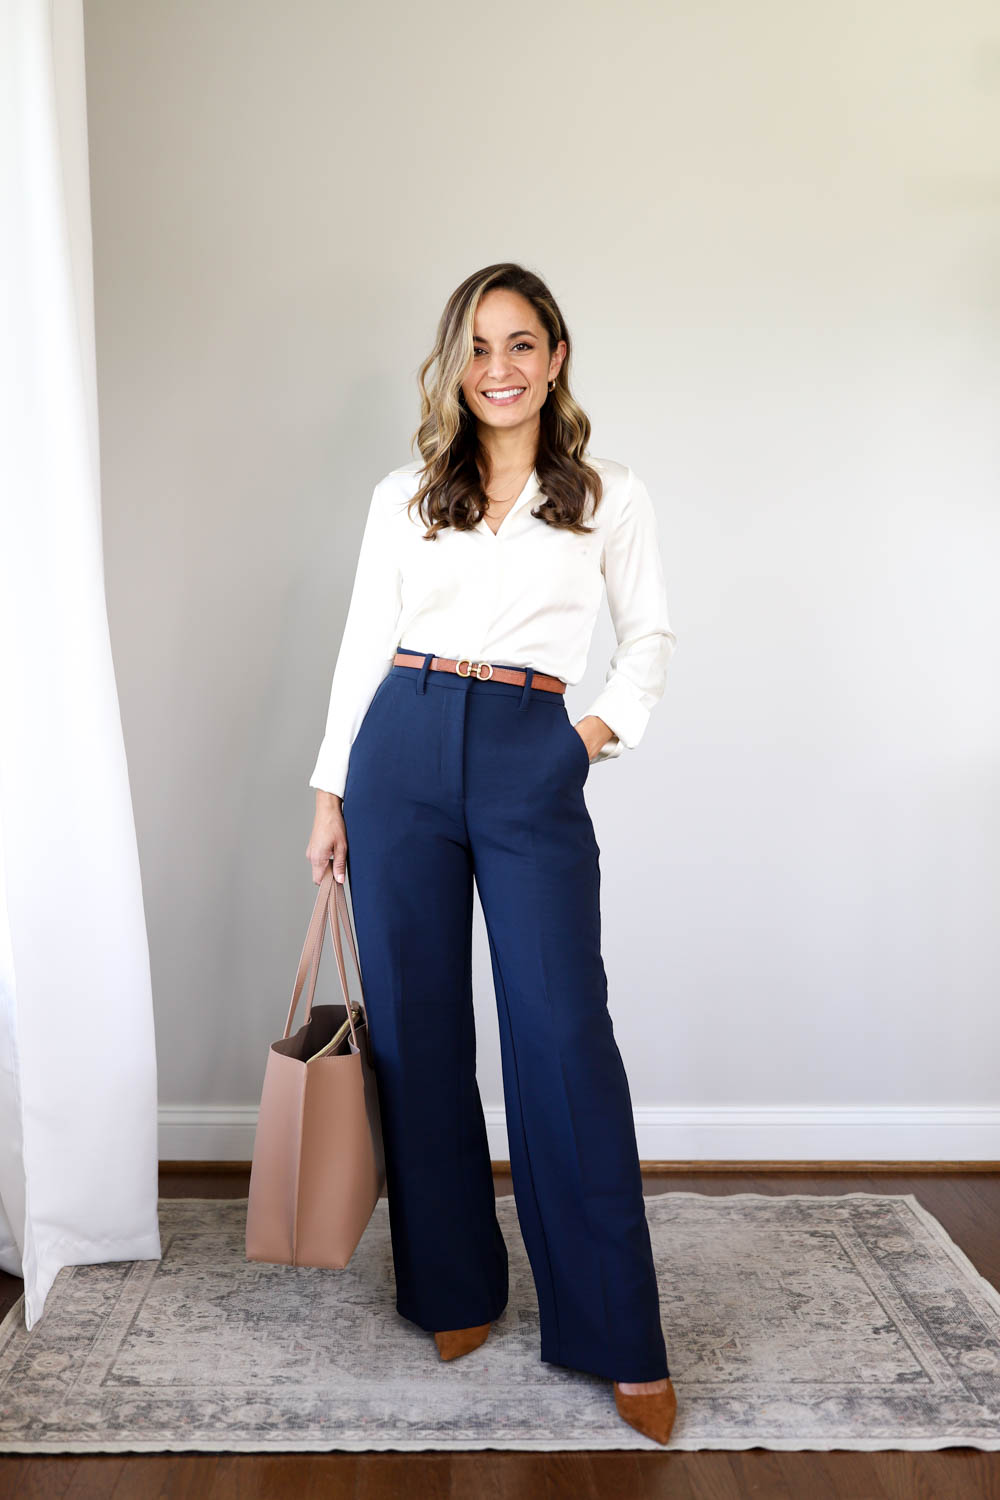 One Week of Outfits for Work - Pumps & Push Ups